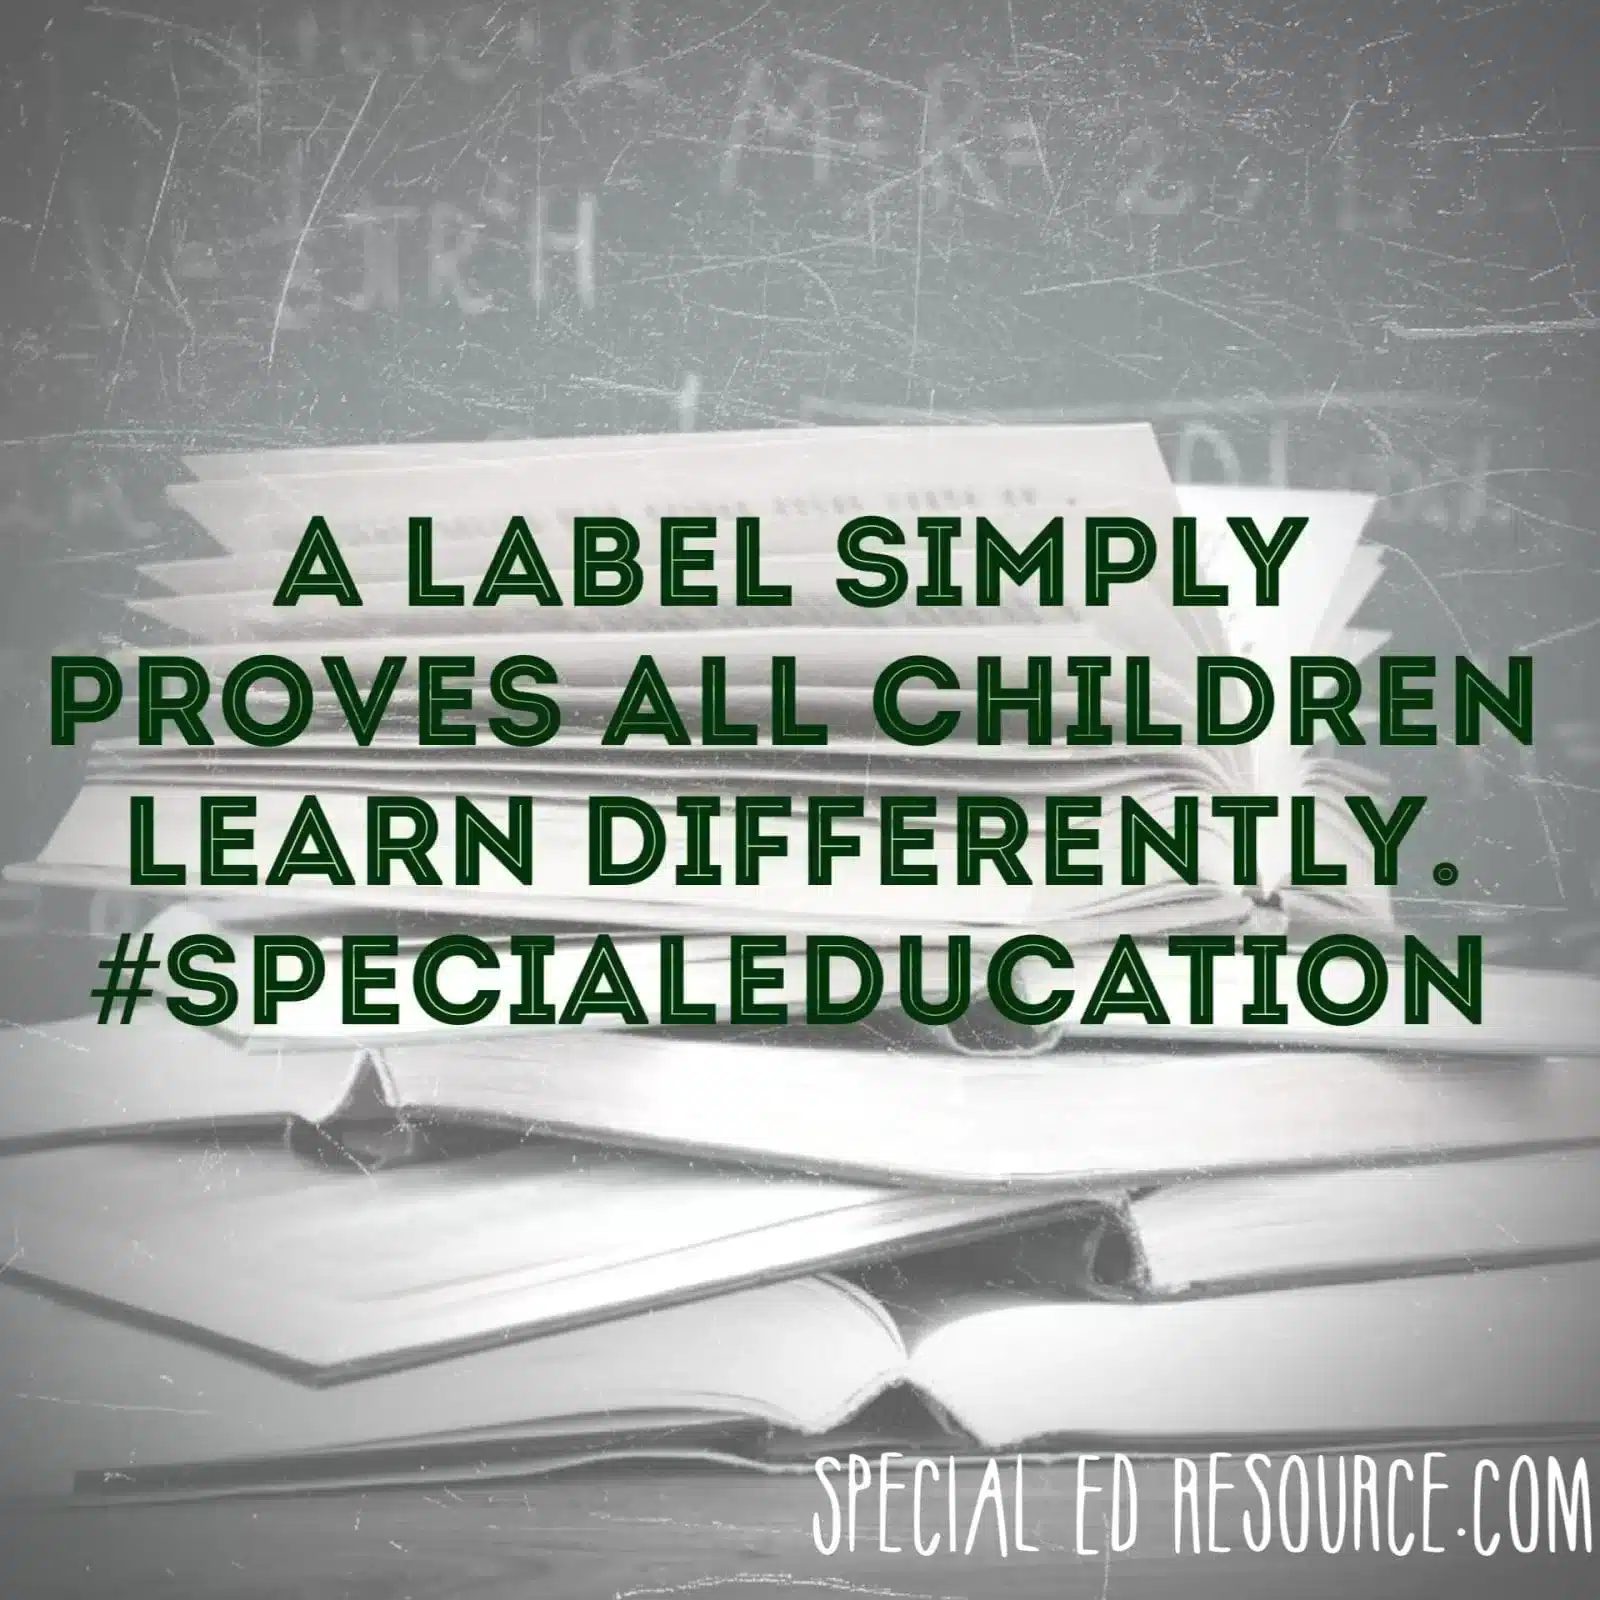 A Label Simply Proves All Children Learn Differently. #SpecialEducation